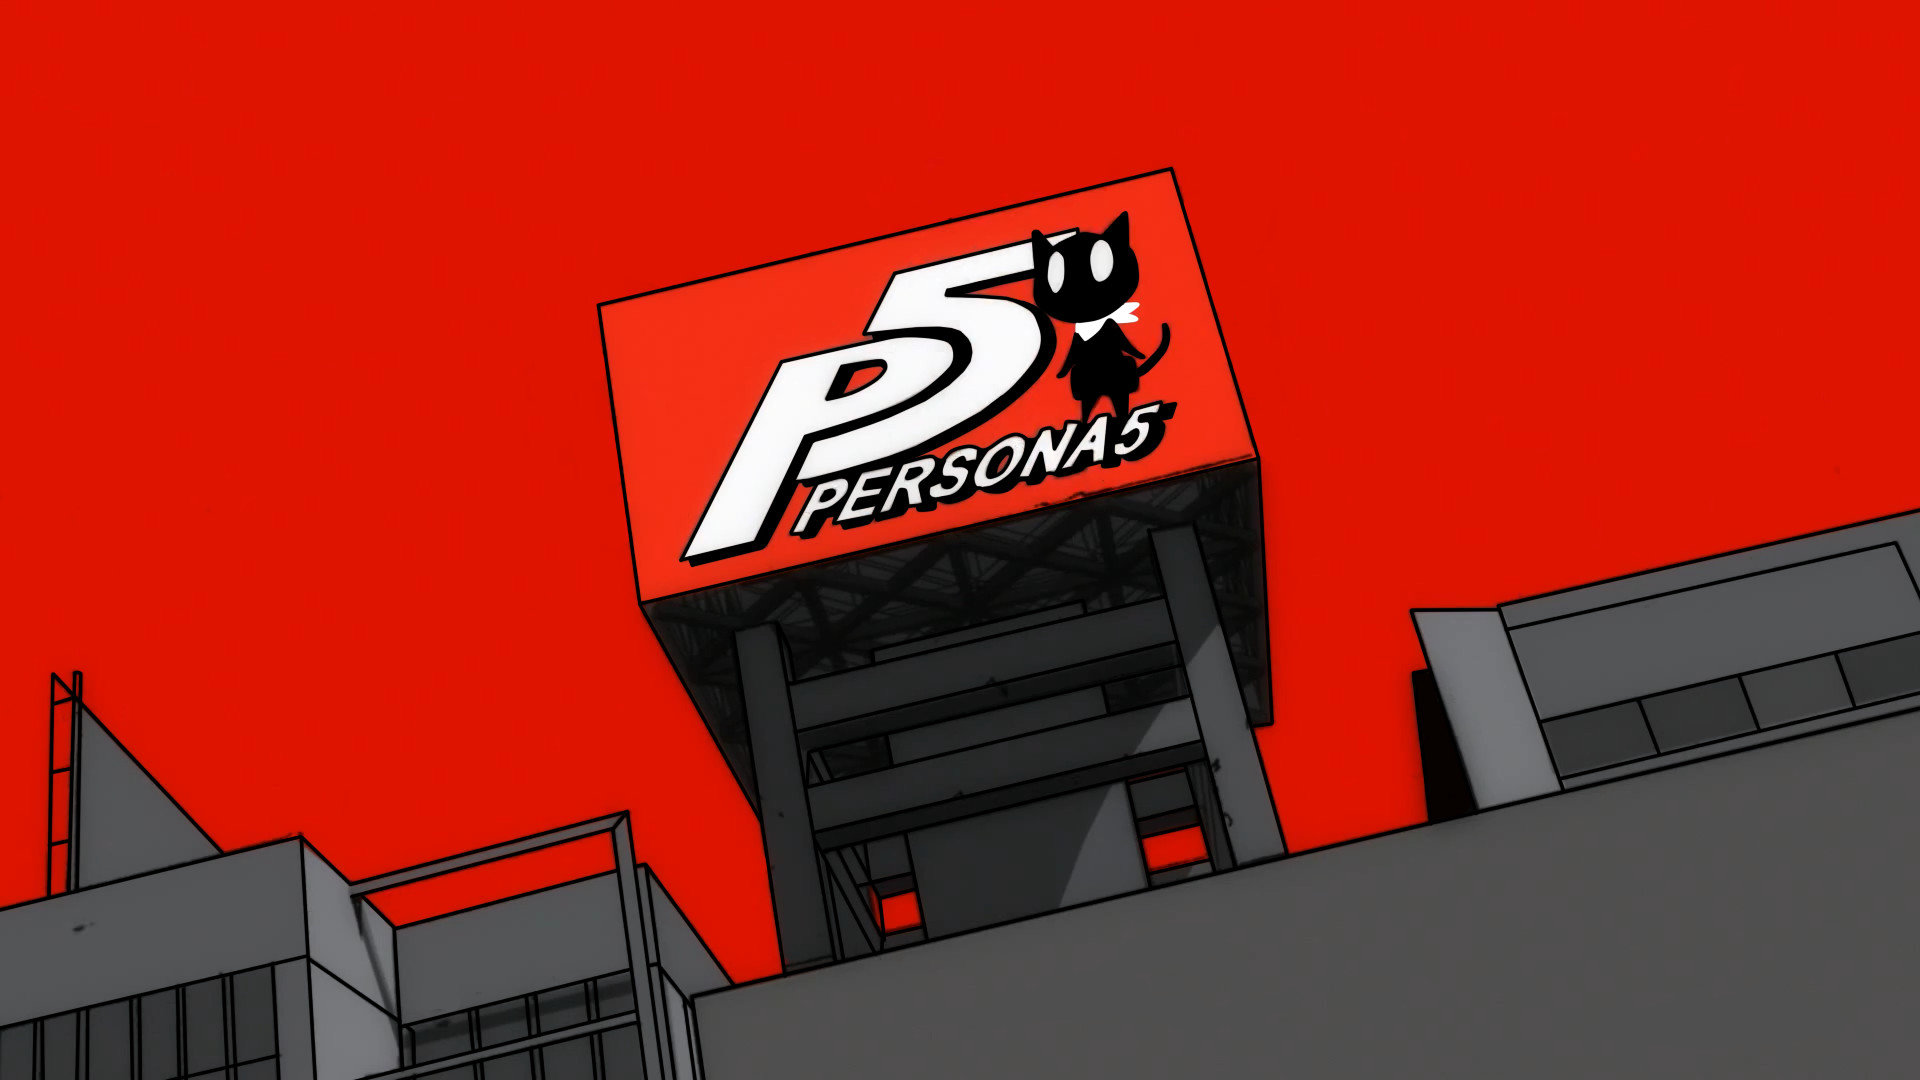 Awesome Persona 5 free wallpaper ID:110887 for hd 1920x1080 desktop